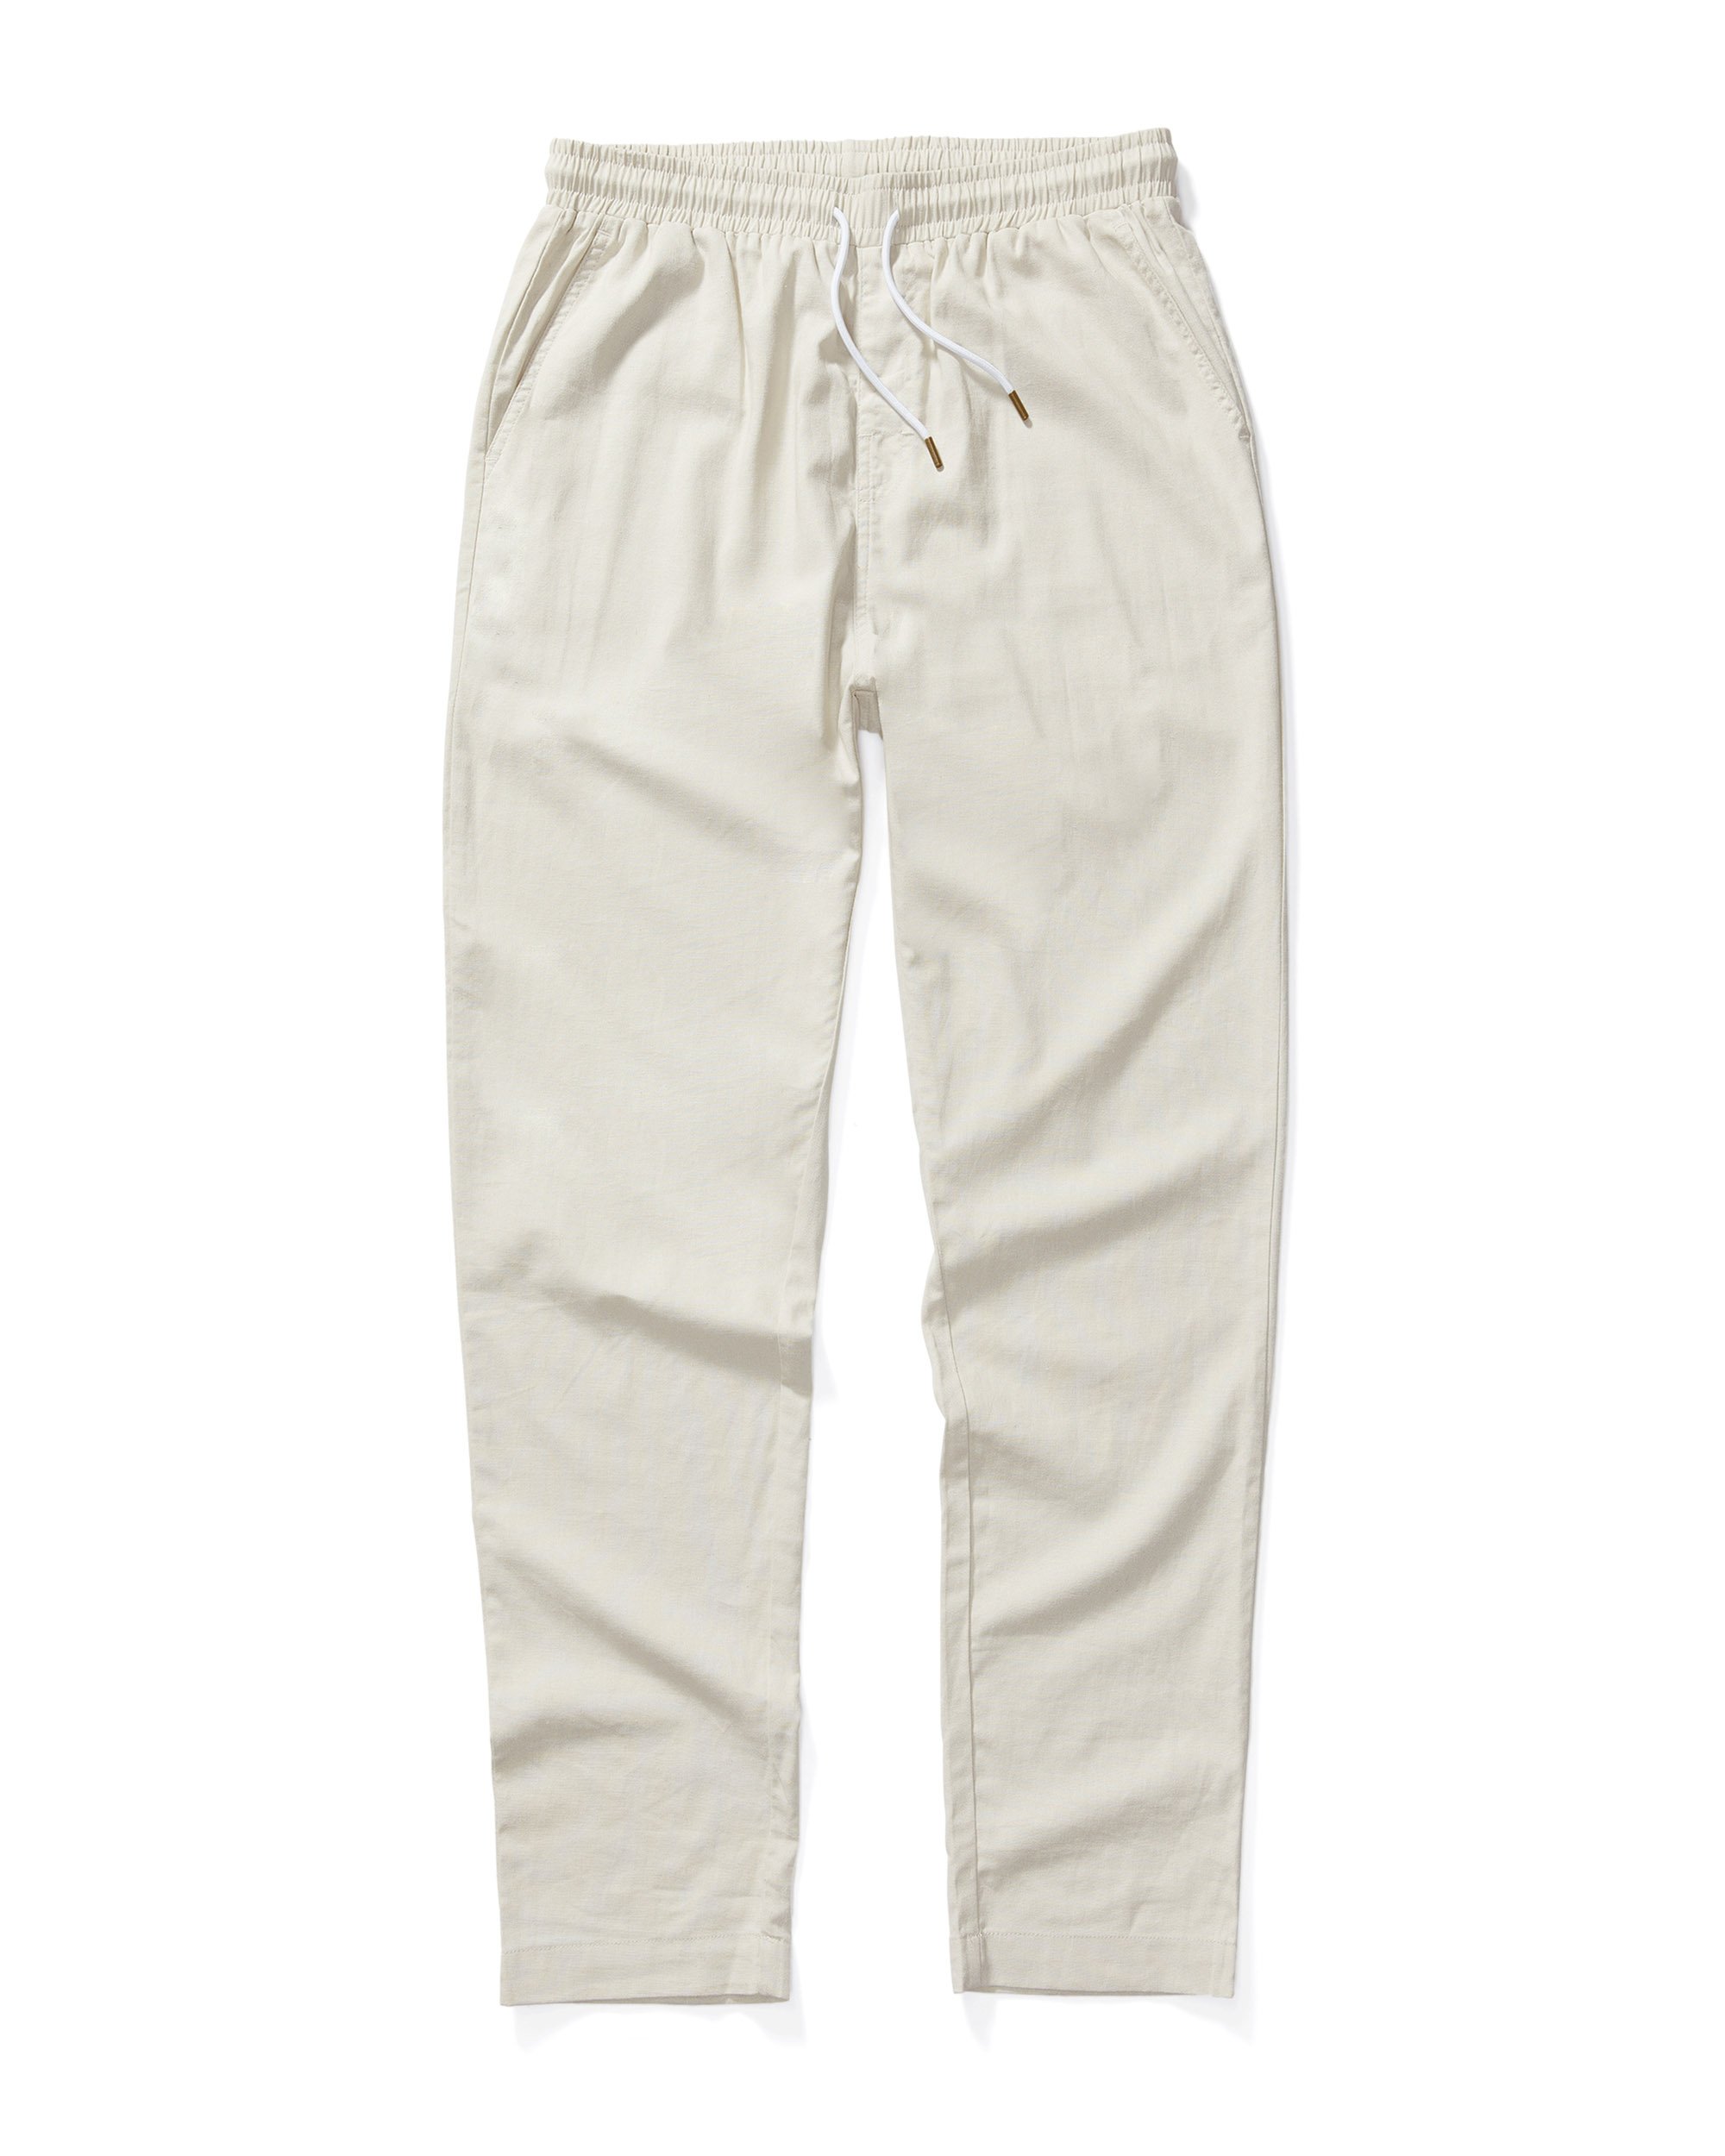 Image of The Brisa Linen Pant - Vintage Ivory